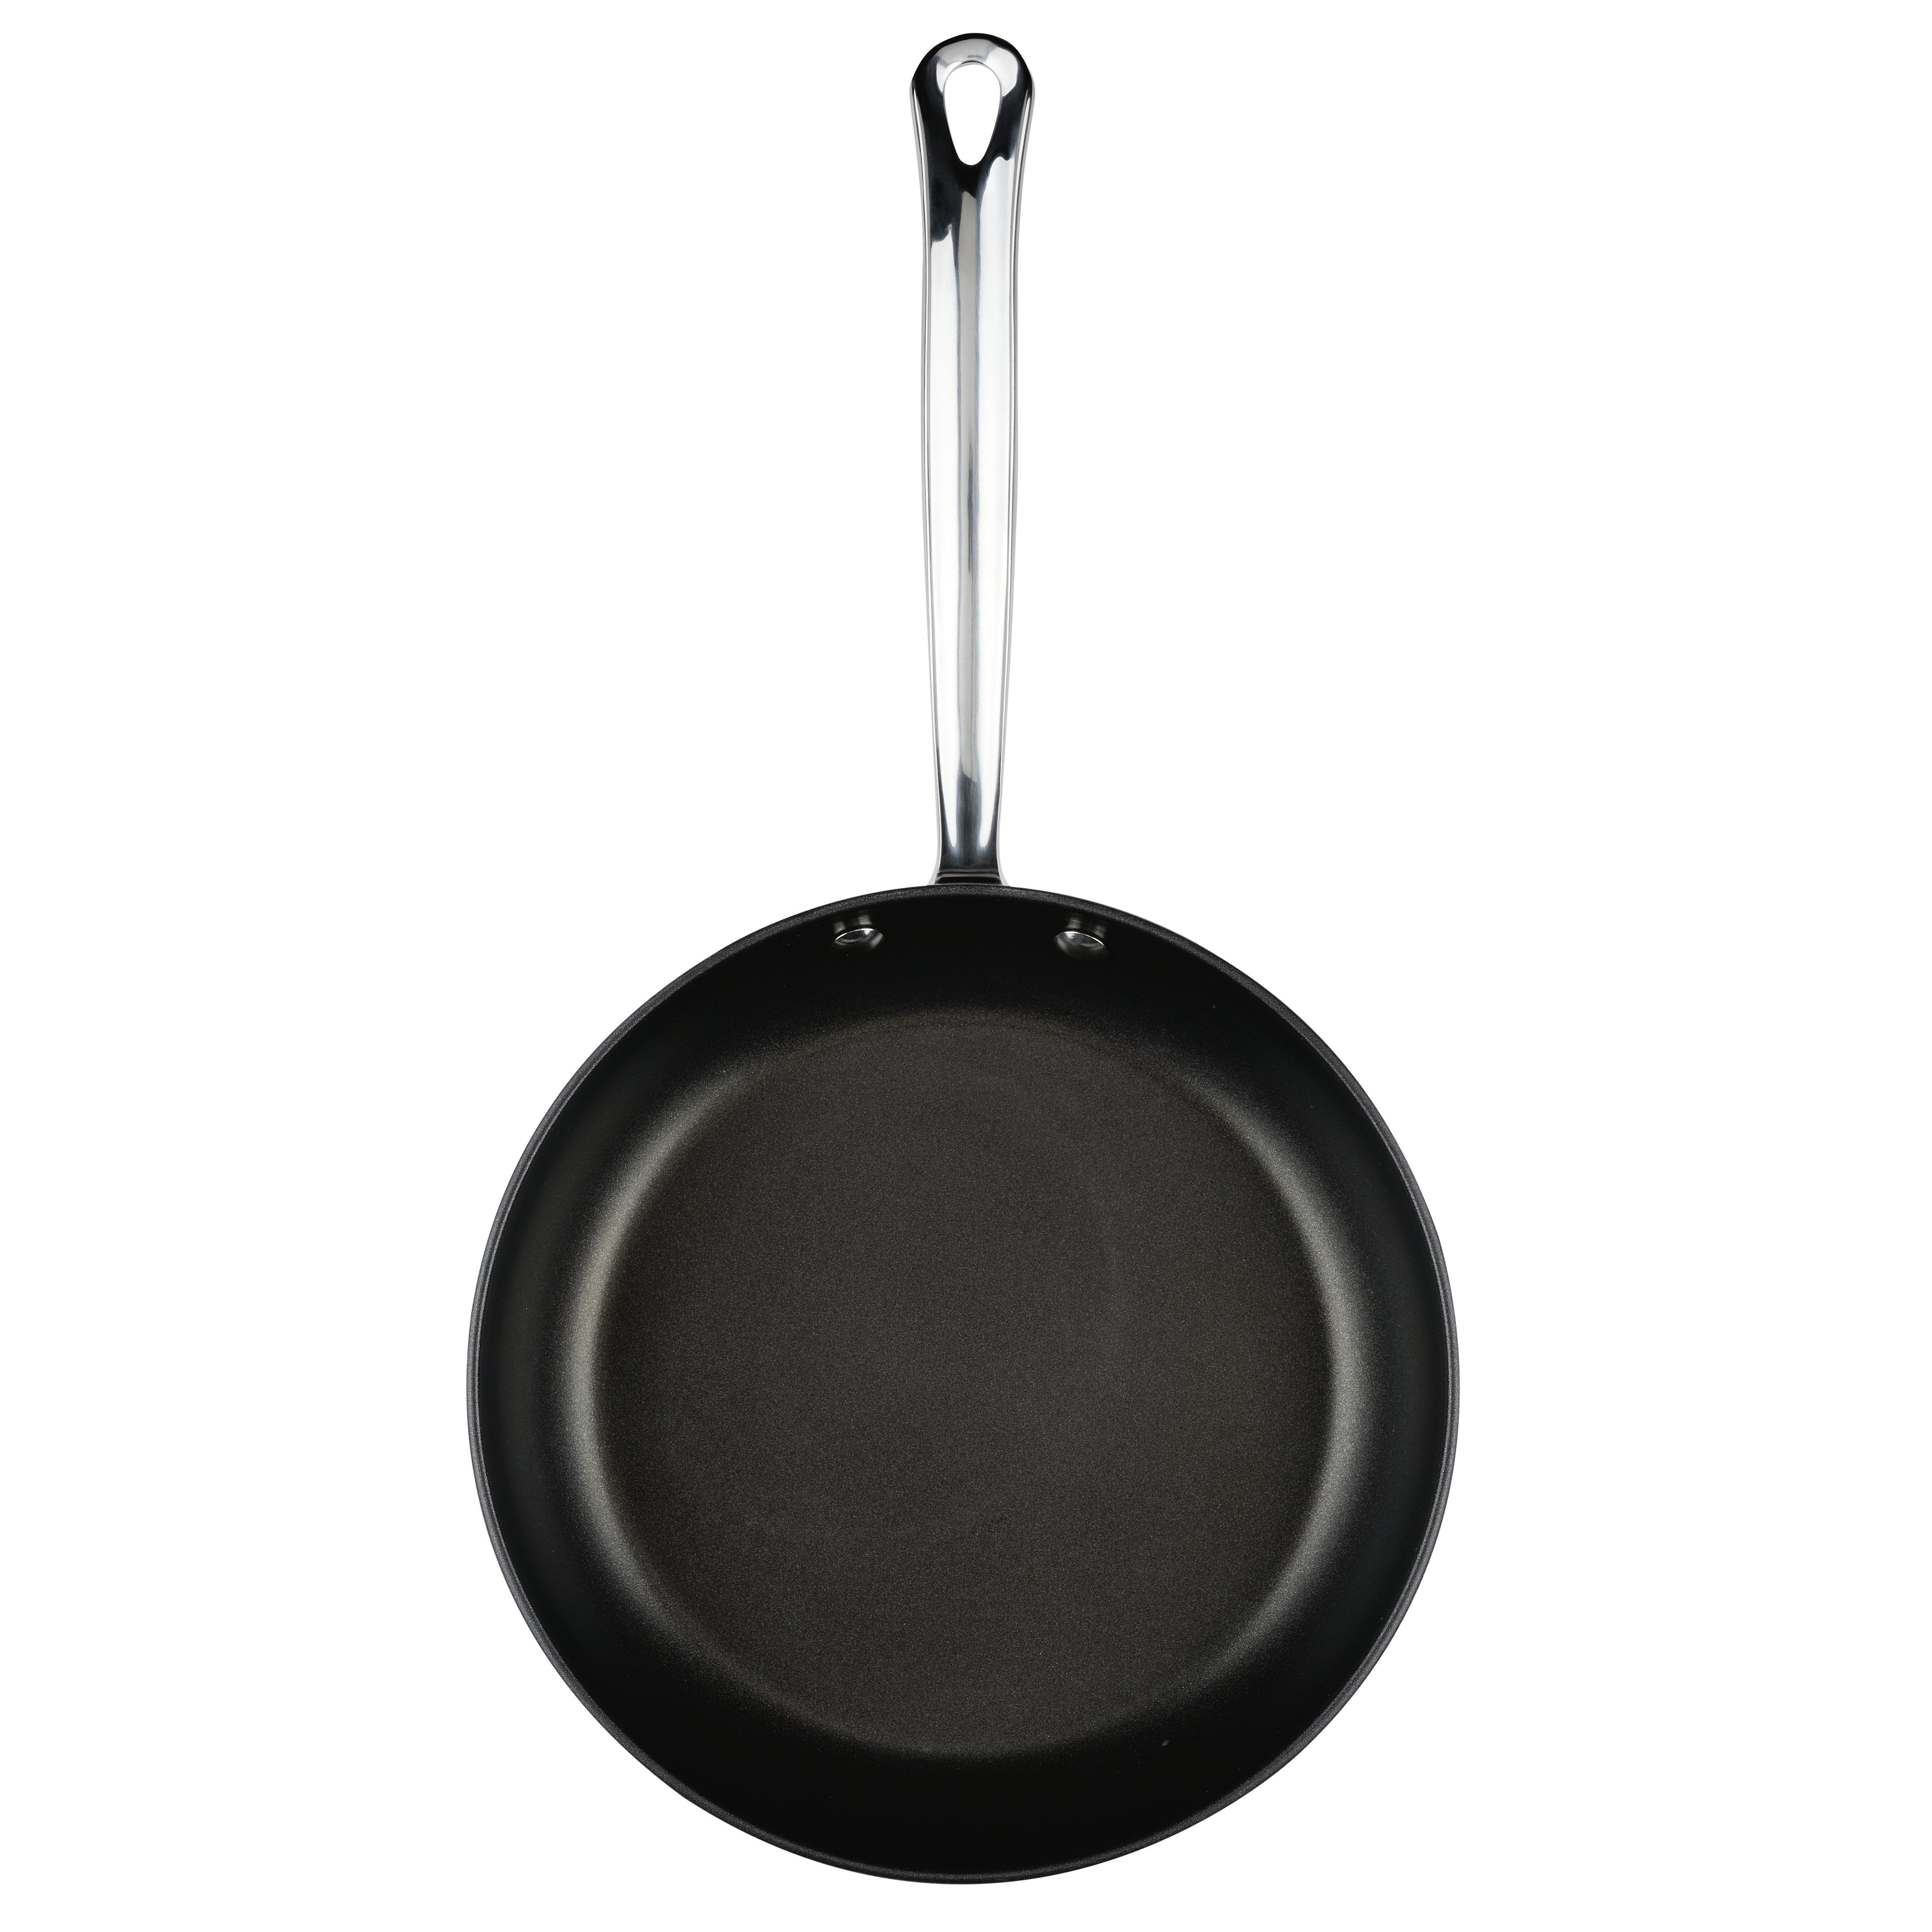 https://ak1.ostkcdn.com/images/products/is/images/direct/a888777c69ea60e5addb4398ddabeaca0c8ac7cd/Farberware-Millennium-Stainless-Steel-Nonstick-Cookware-Induction-Pots-and-Pans-Set%2C-10-Piece.jpg